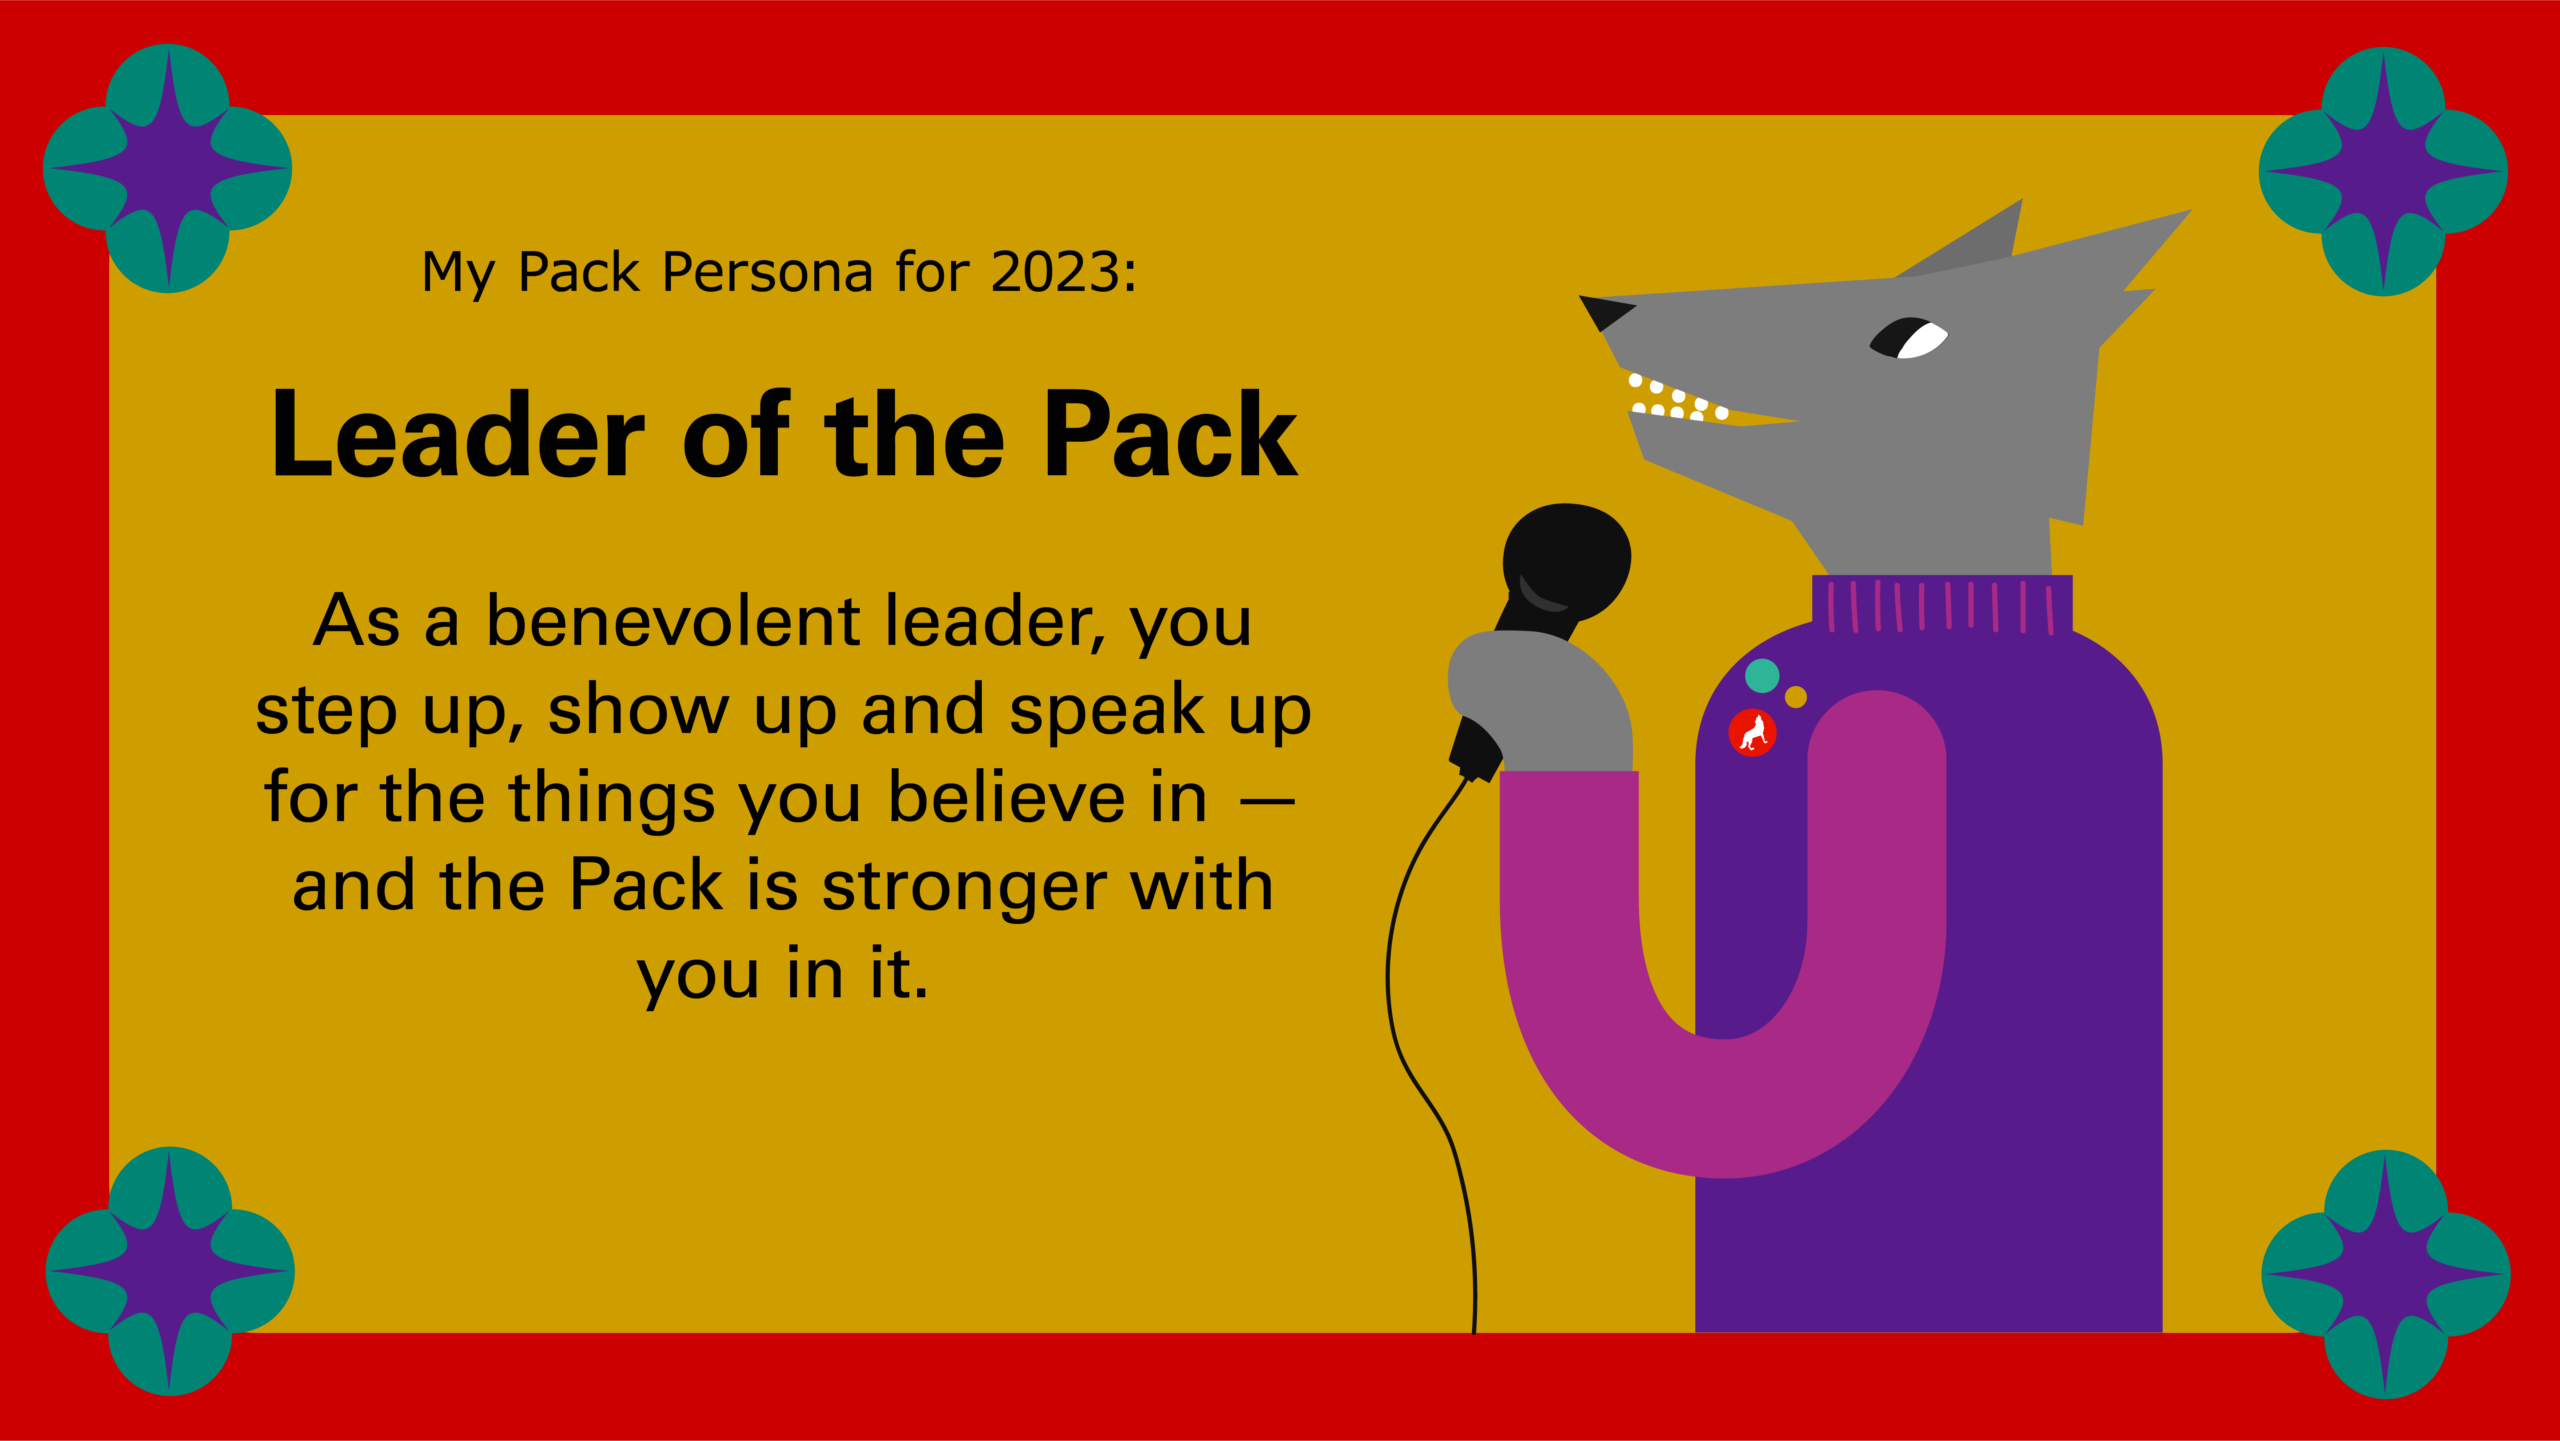 Leader of the Pack: As a benevolent leader, you step up, show up and speak up for the things you believe in — and the Pack is stronger with you in it.